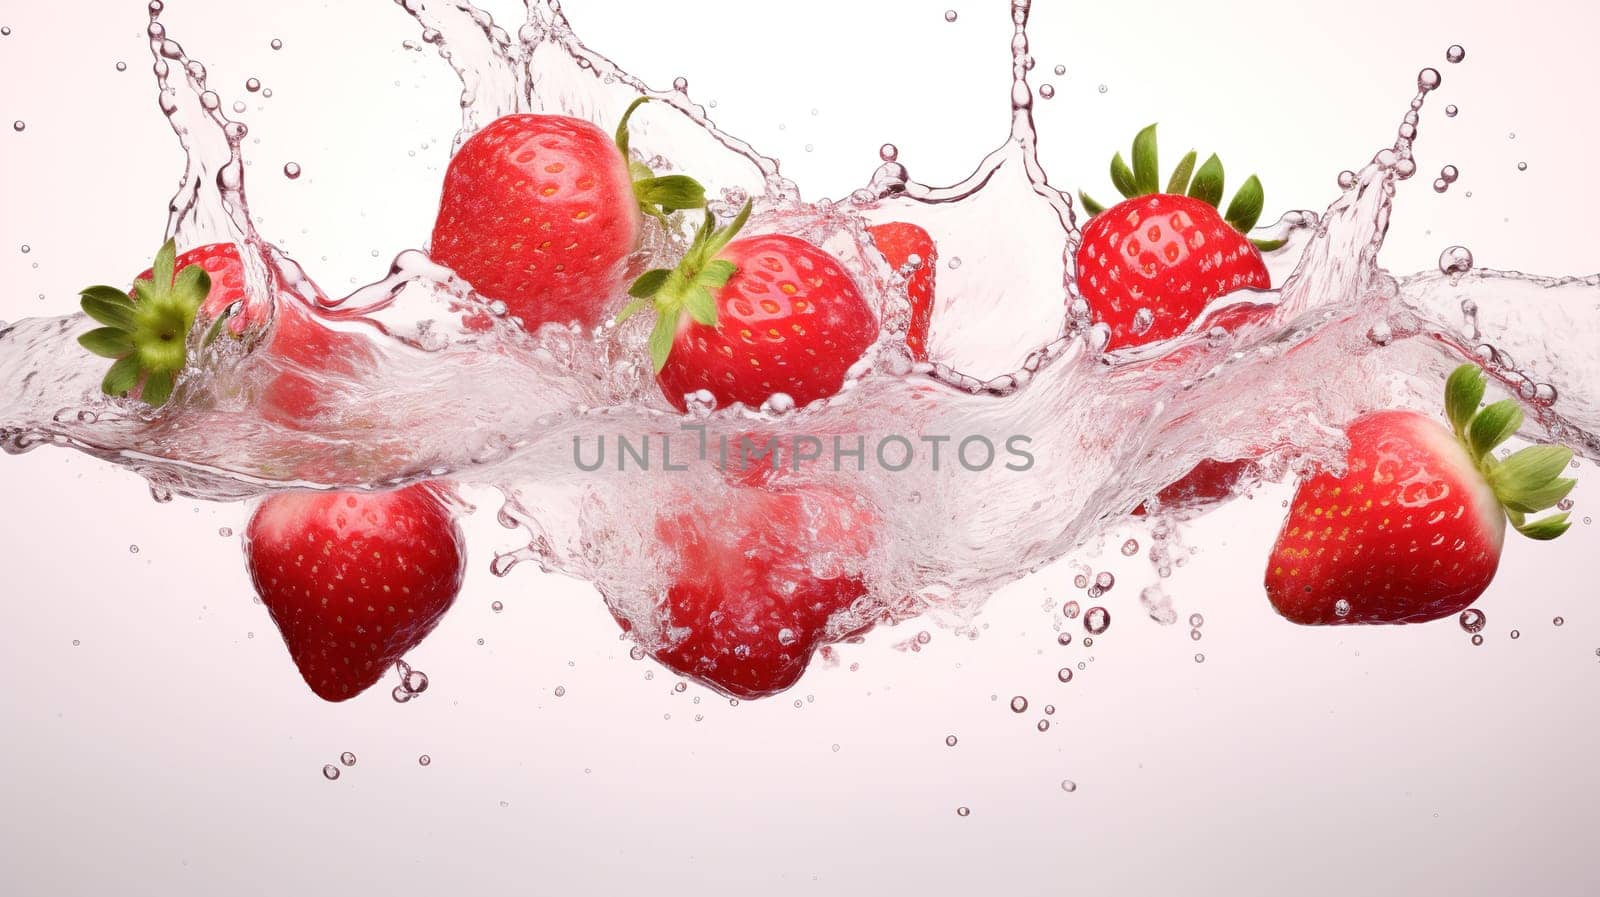 pink strawberries, with splashes of water, white background  Generate AI by Mrsongrphc